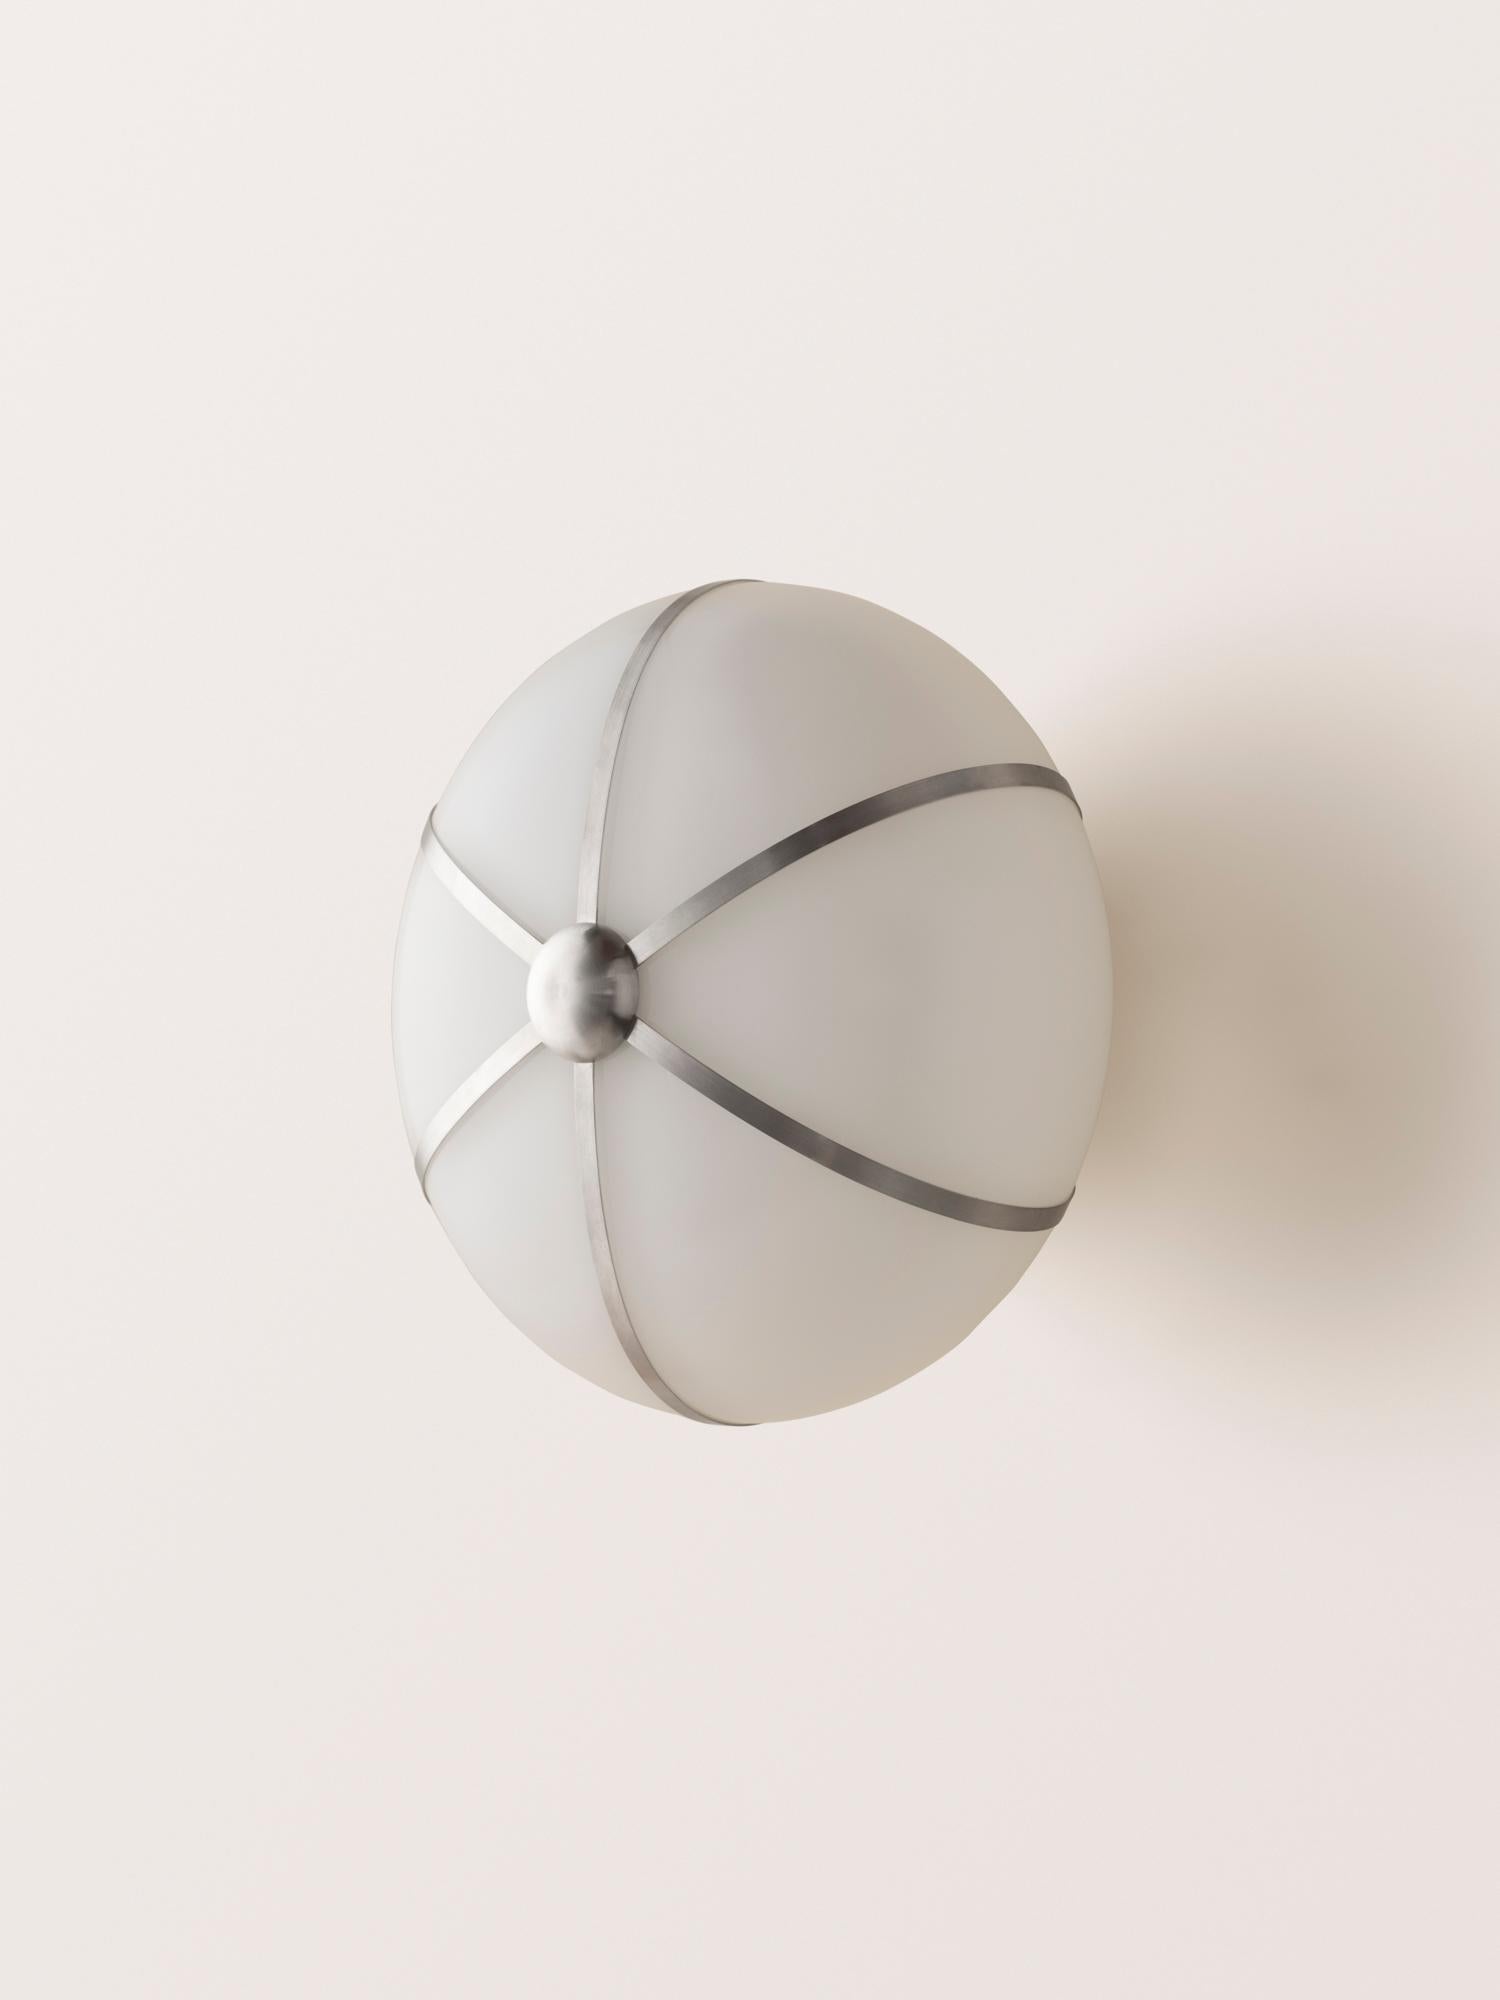 The Rib Sconce - Small Ellipse is blown in Italy and delicately framed by thin brass ribs.

This listing is priced for the satin nickel finish. Please inquire for pricing of other finish options.
